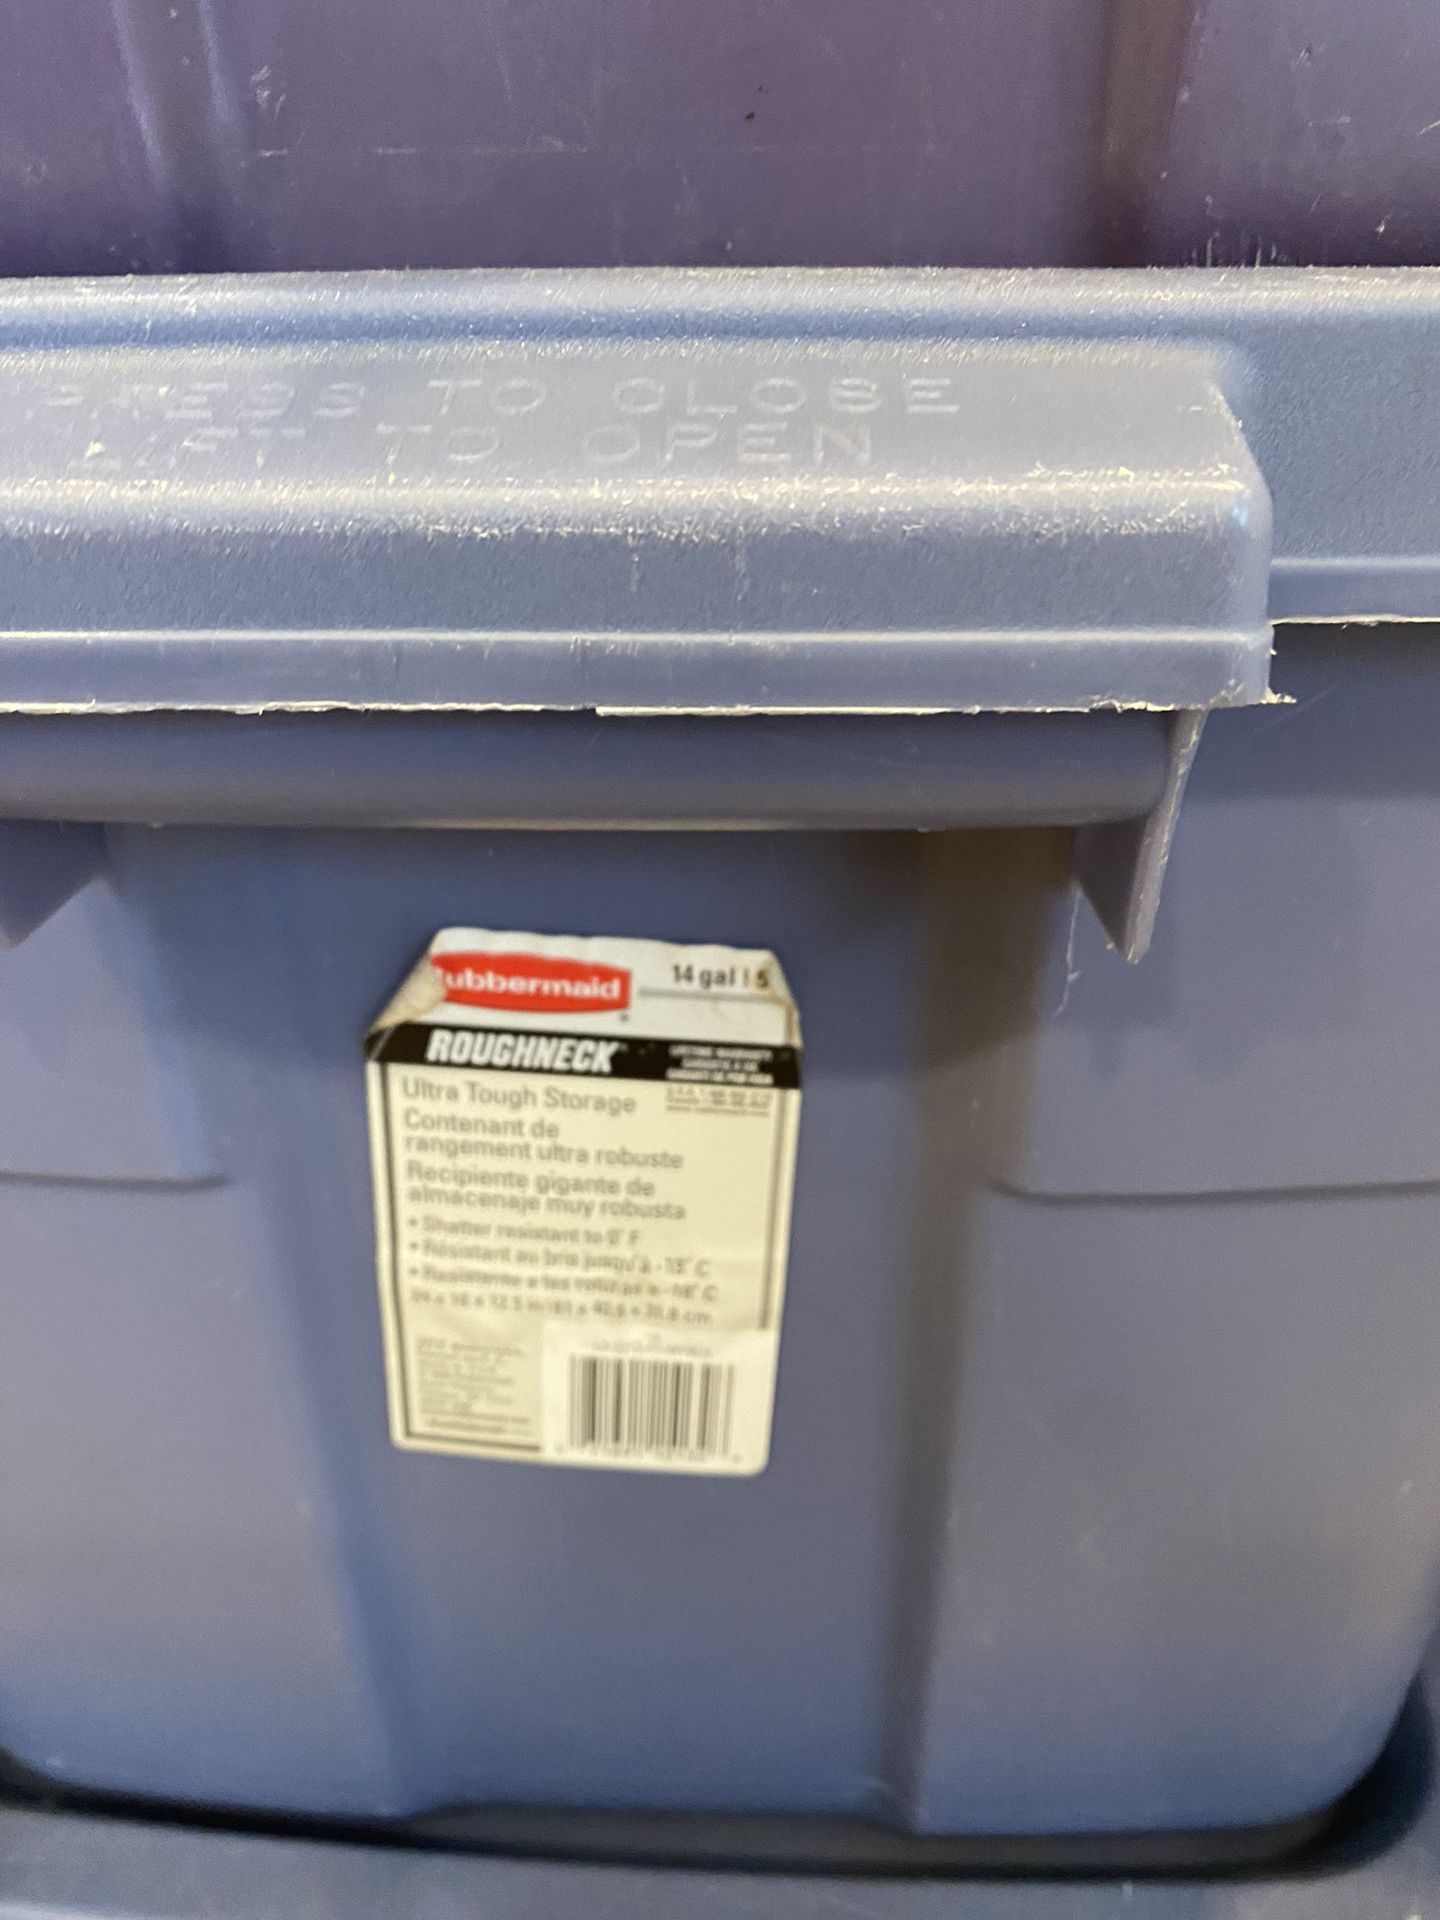 7 Clean Rubbermaid Roughneck Storage Totes/ Tub/ Container Mixed Sizes With  Lids for Sale in Chicago, IL - OfferUp